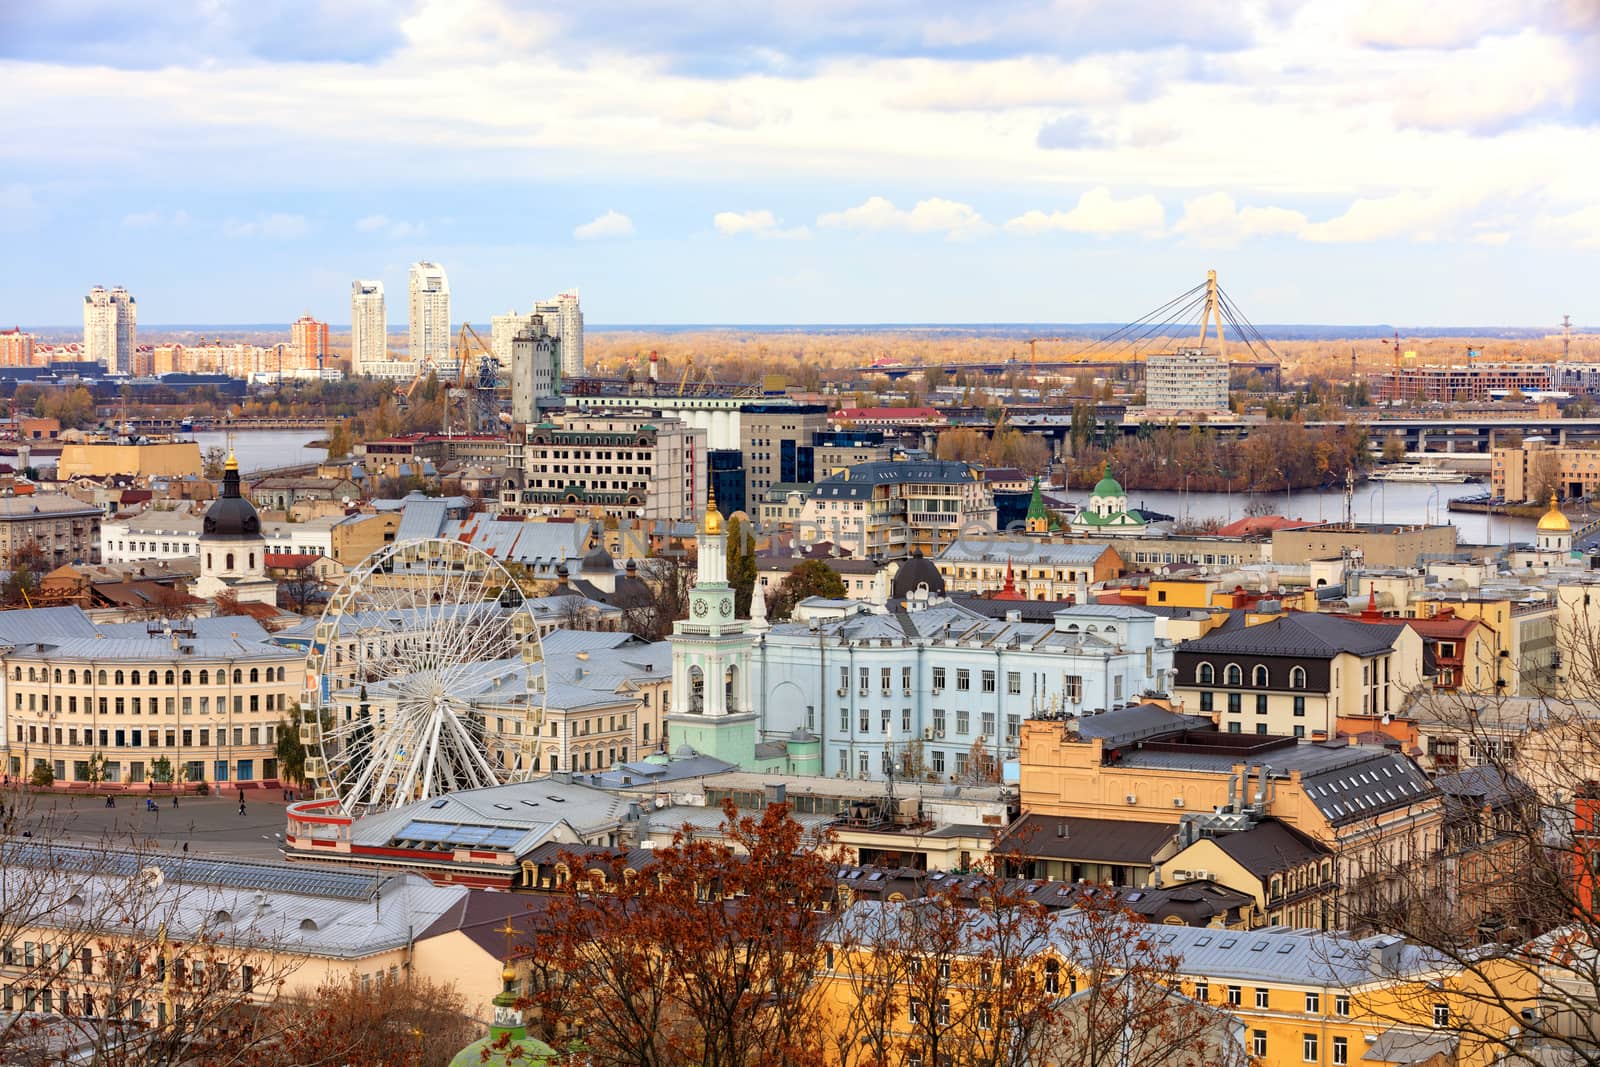 The landscape of the autumn city of Kyiv overlooking the old district of Podil with a Ferris wheel and a bell tower with a gilded dome, the Dnipro River and many bridges. by Sergii